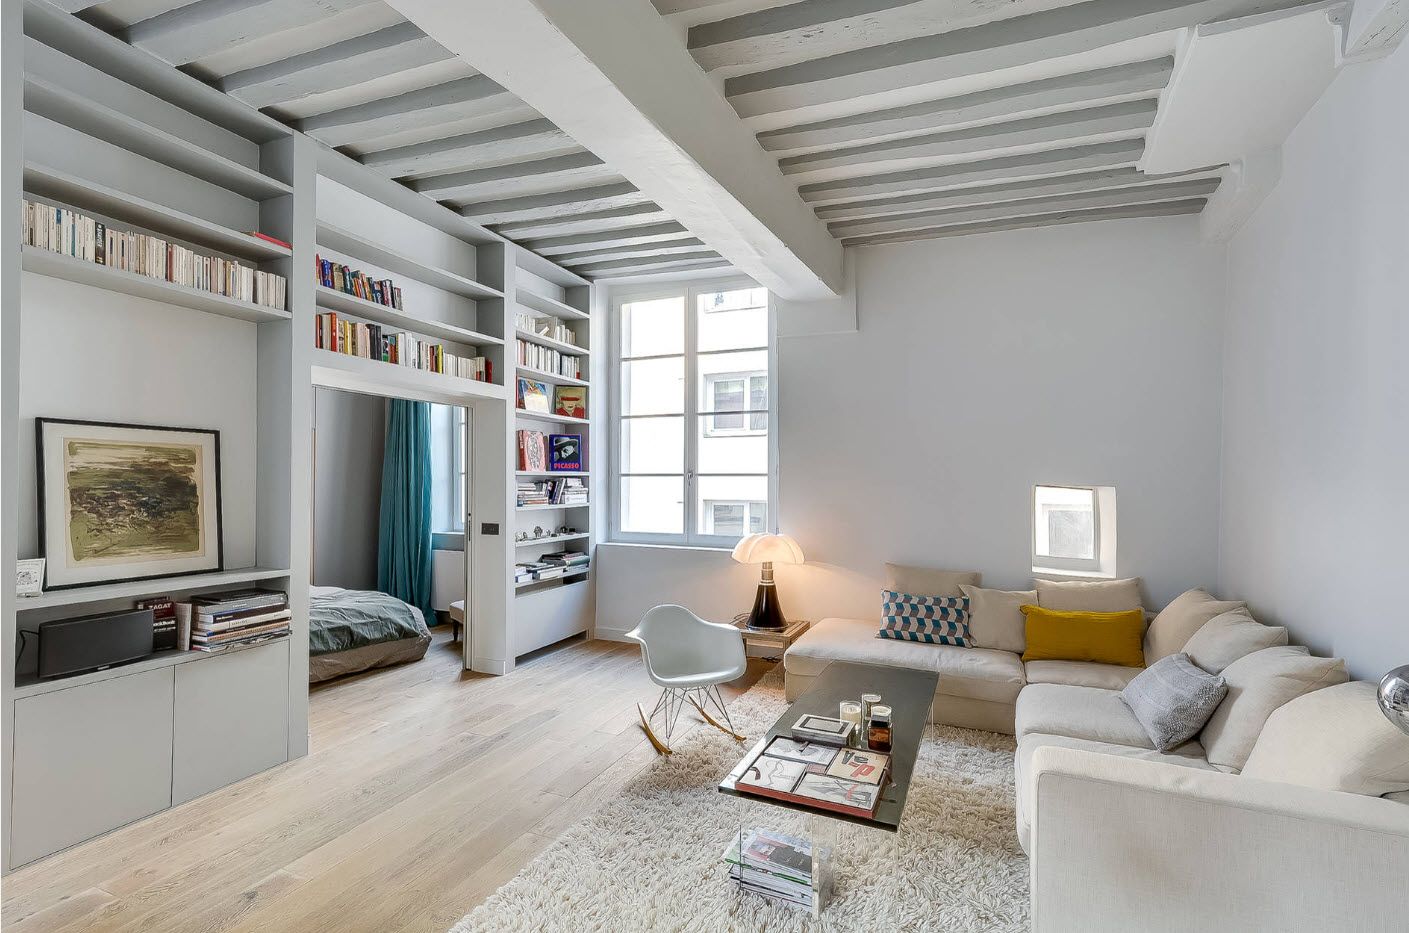 Open layout and wooden ceiling beams in pronounced loft styled room